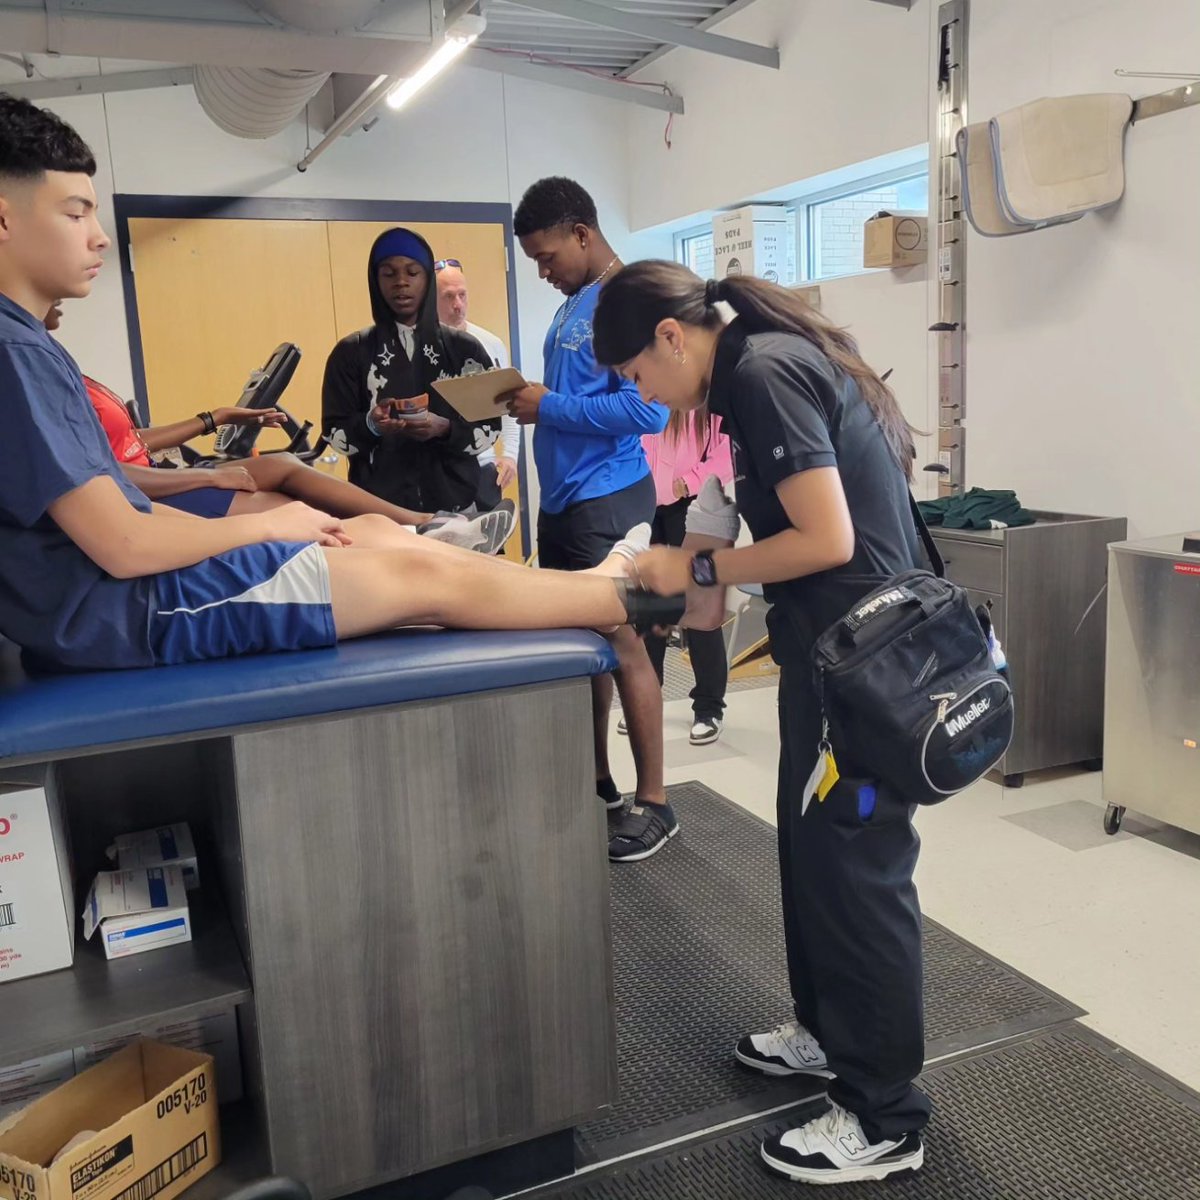 Hands-on skills in action during internships at Kimball and Molina! 🤝💼 Our students are gaining invaluable experience and practical knowledge in the real world. Keep up the great work, future professionals! 🌟 #InternshipExperience #HandsOnSkills #RealWorldLearning